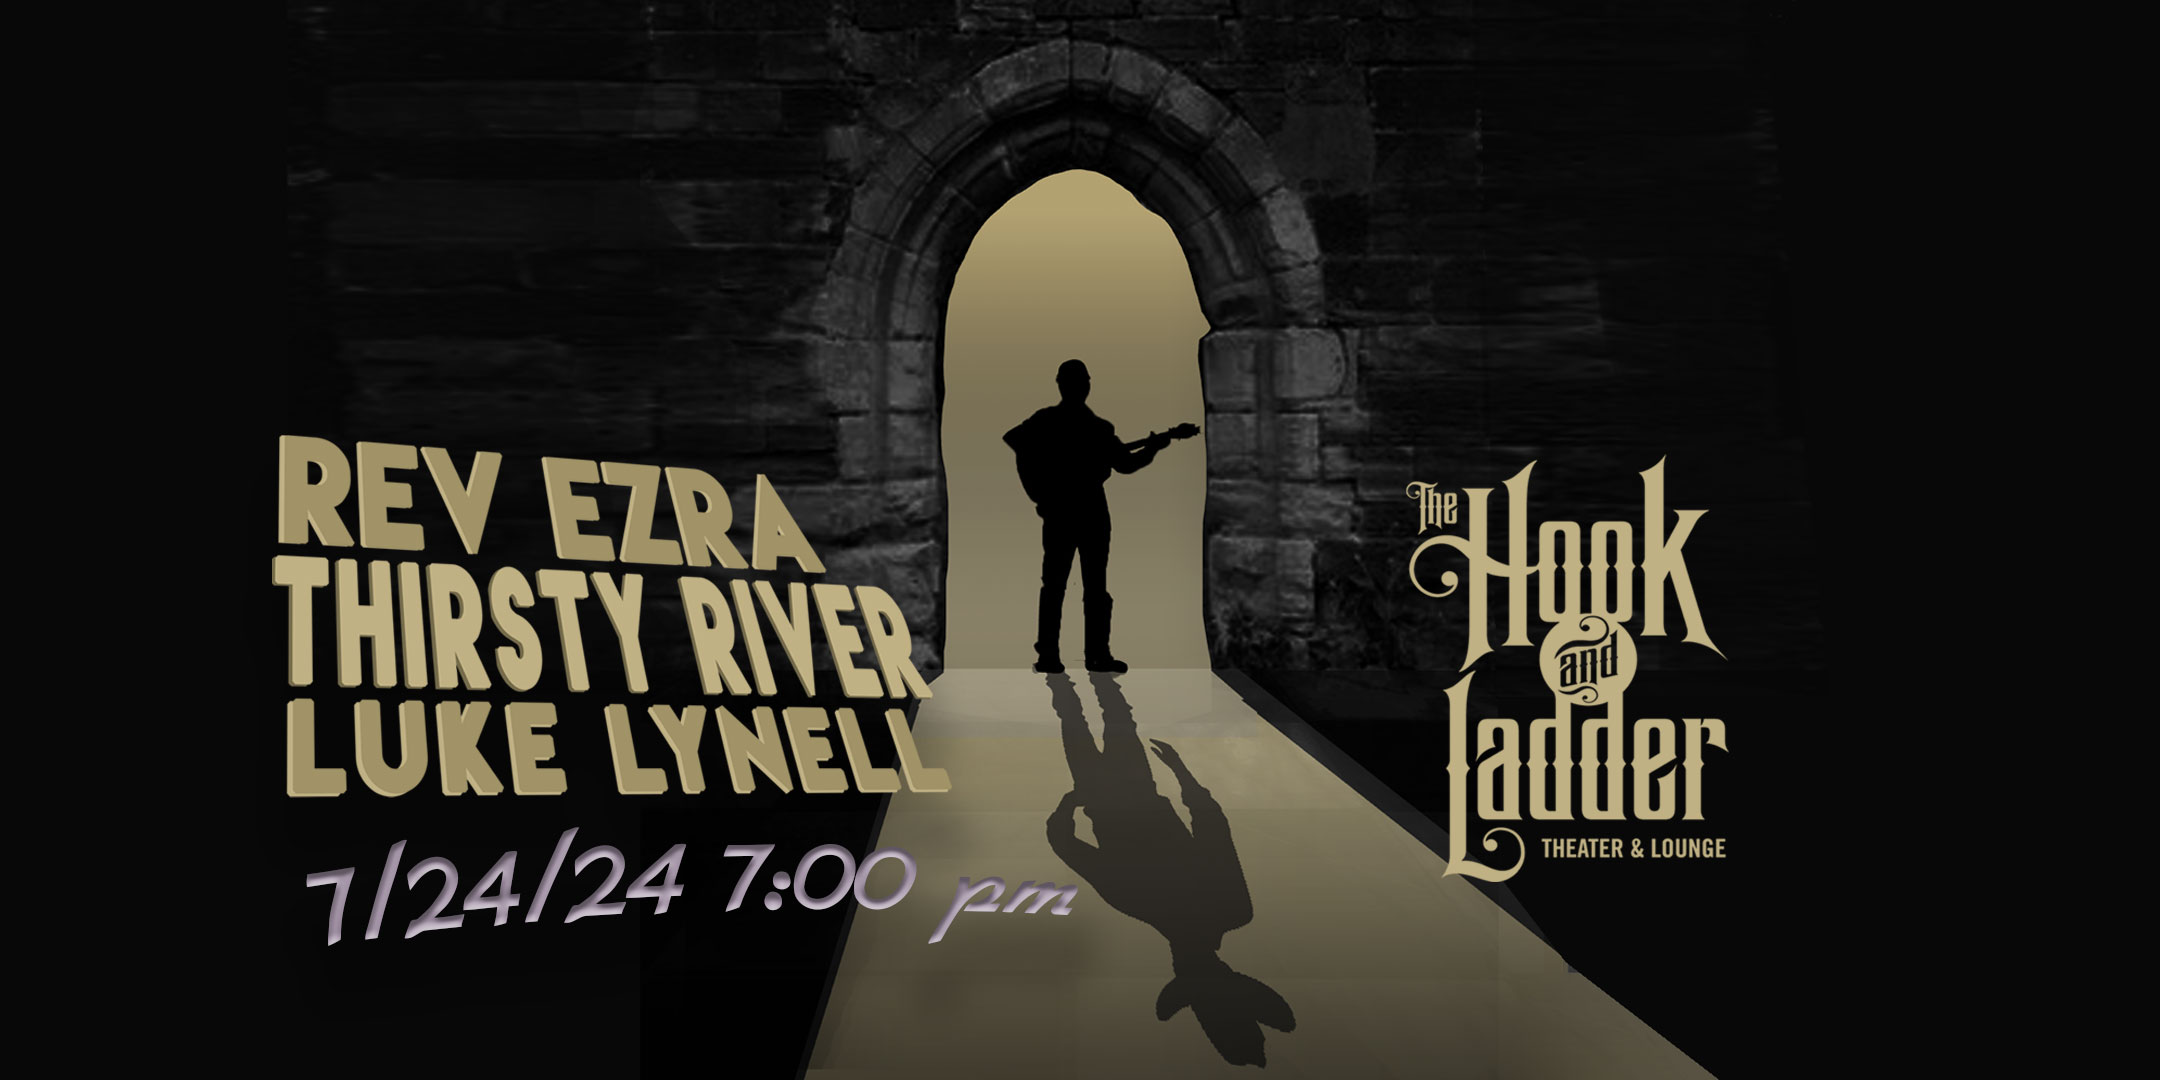 The Thirsty River, Rev Ezra & Luke Lynell Wednesday, July 24 The Hook and Ladder Theater Doors 7:30 :: Music 8:00pm :: 21+ $10 Advance / $15 Day of Show